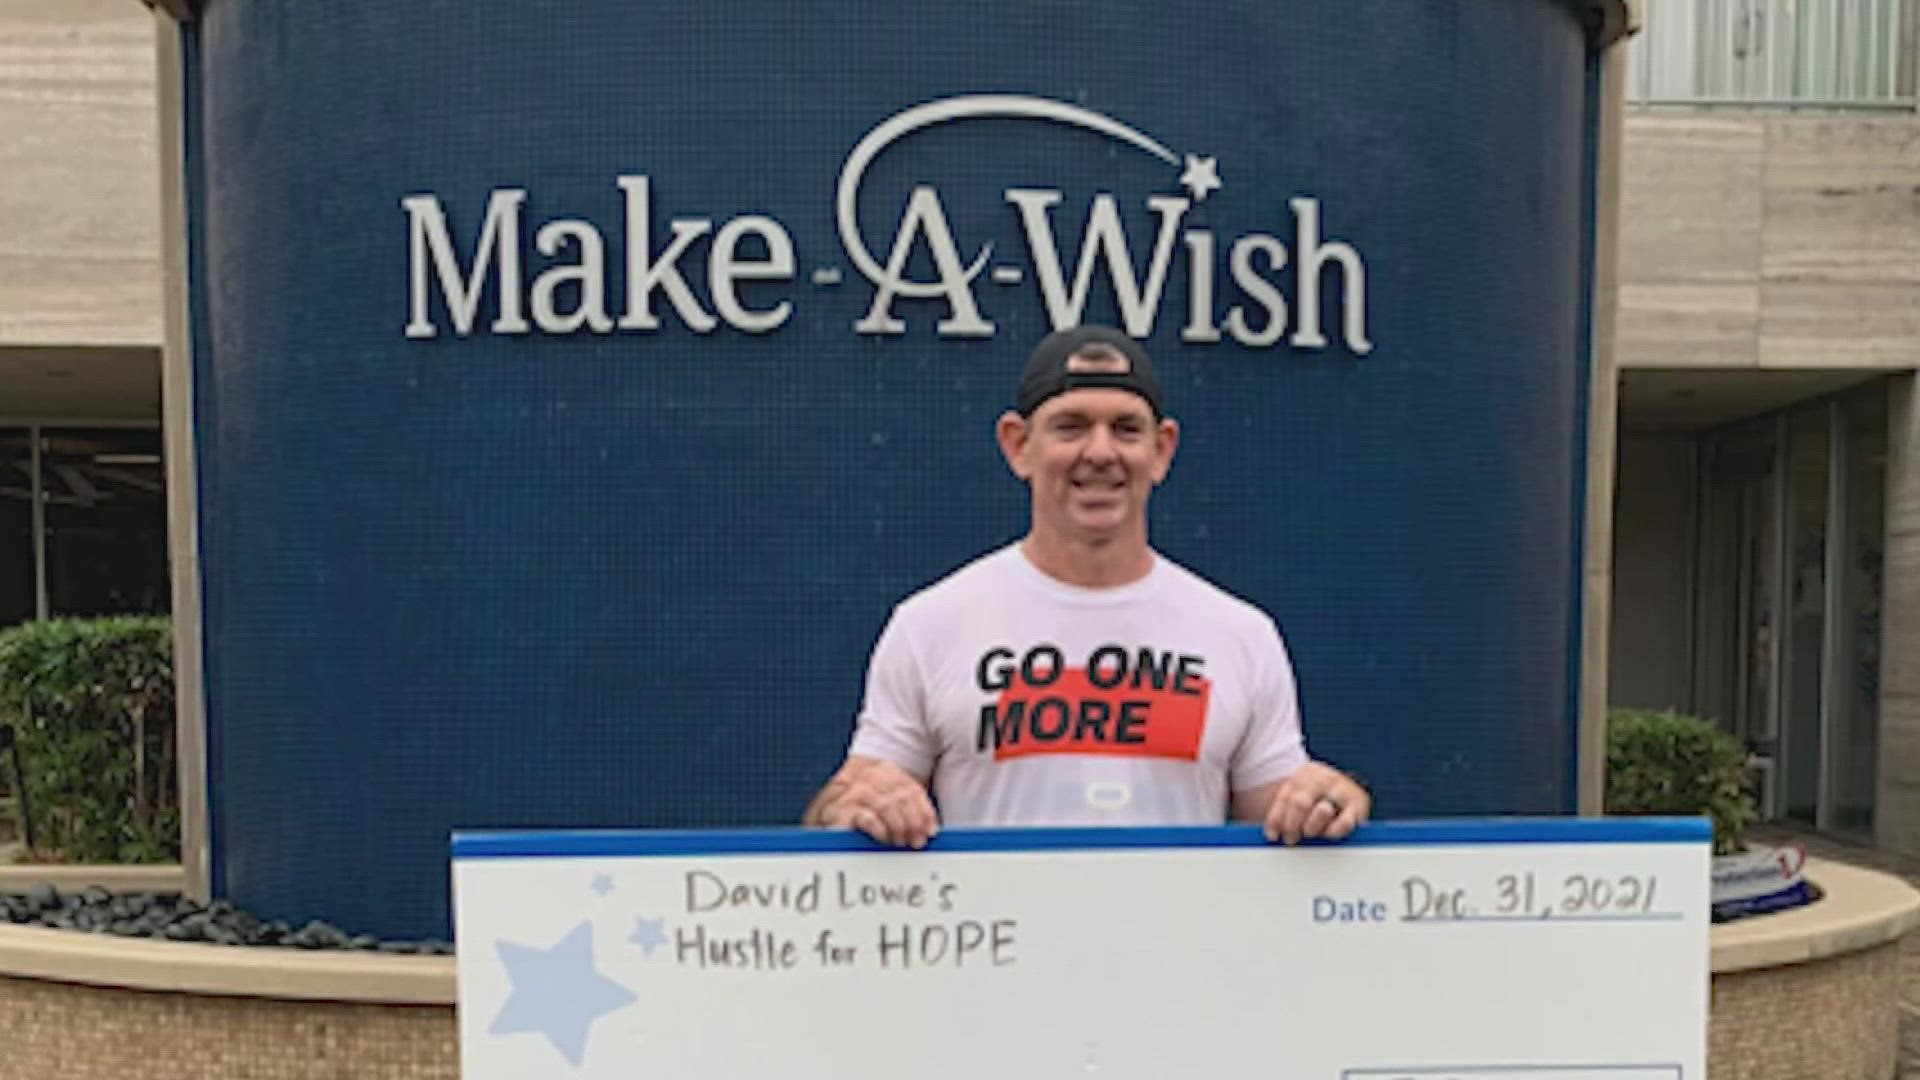 David Lowe wanted to raise money for the Make-A-Wish Foundation